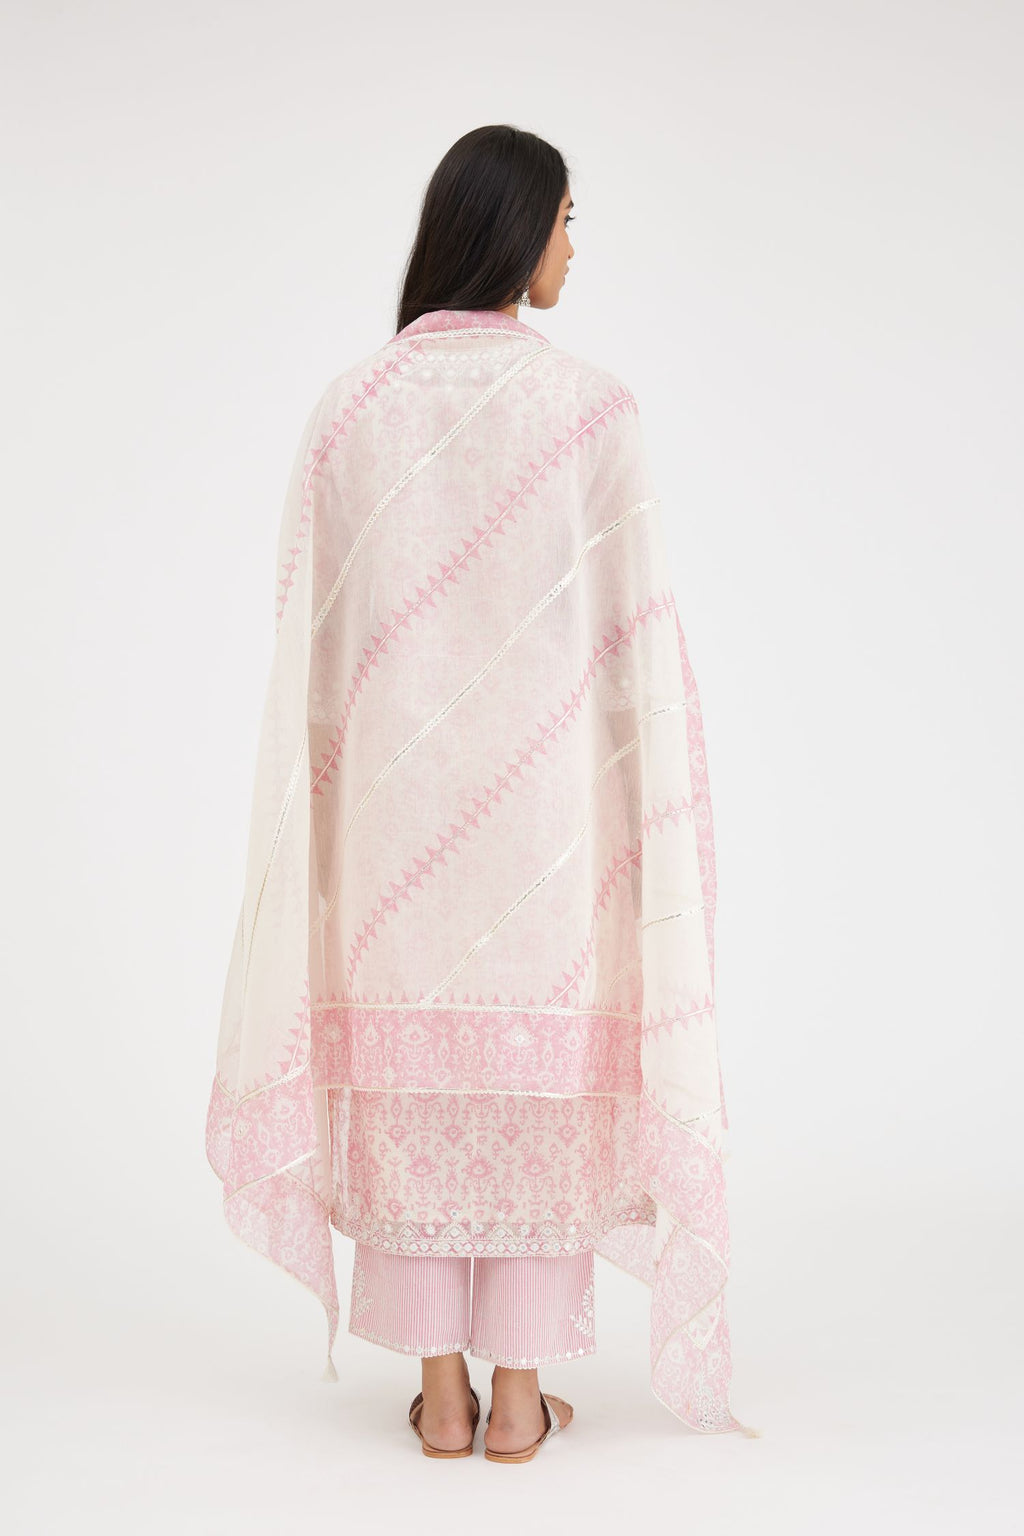 Ikat design pink and off white hand block-printed Cotton Chanderi straight long kurta set with off-white thread and mirror embroidery